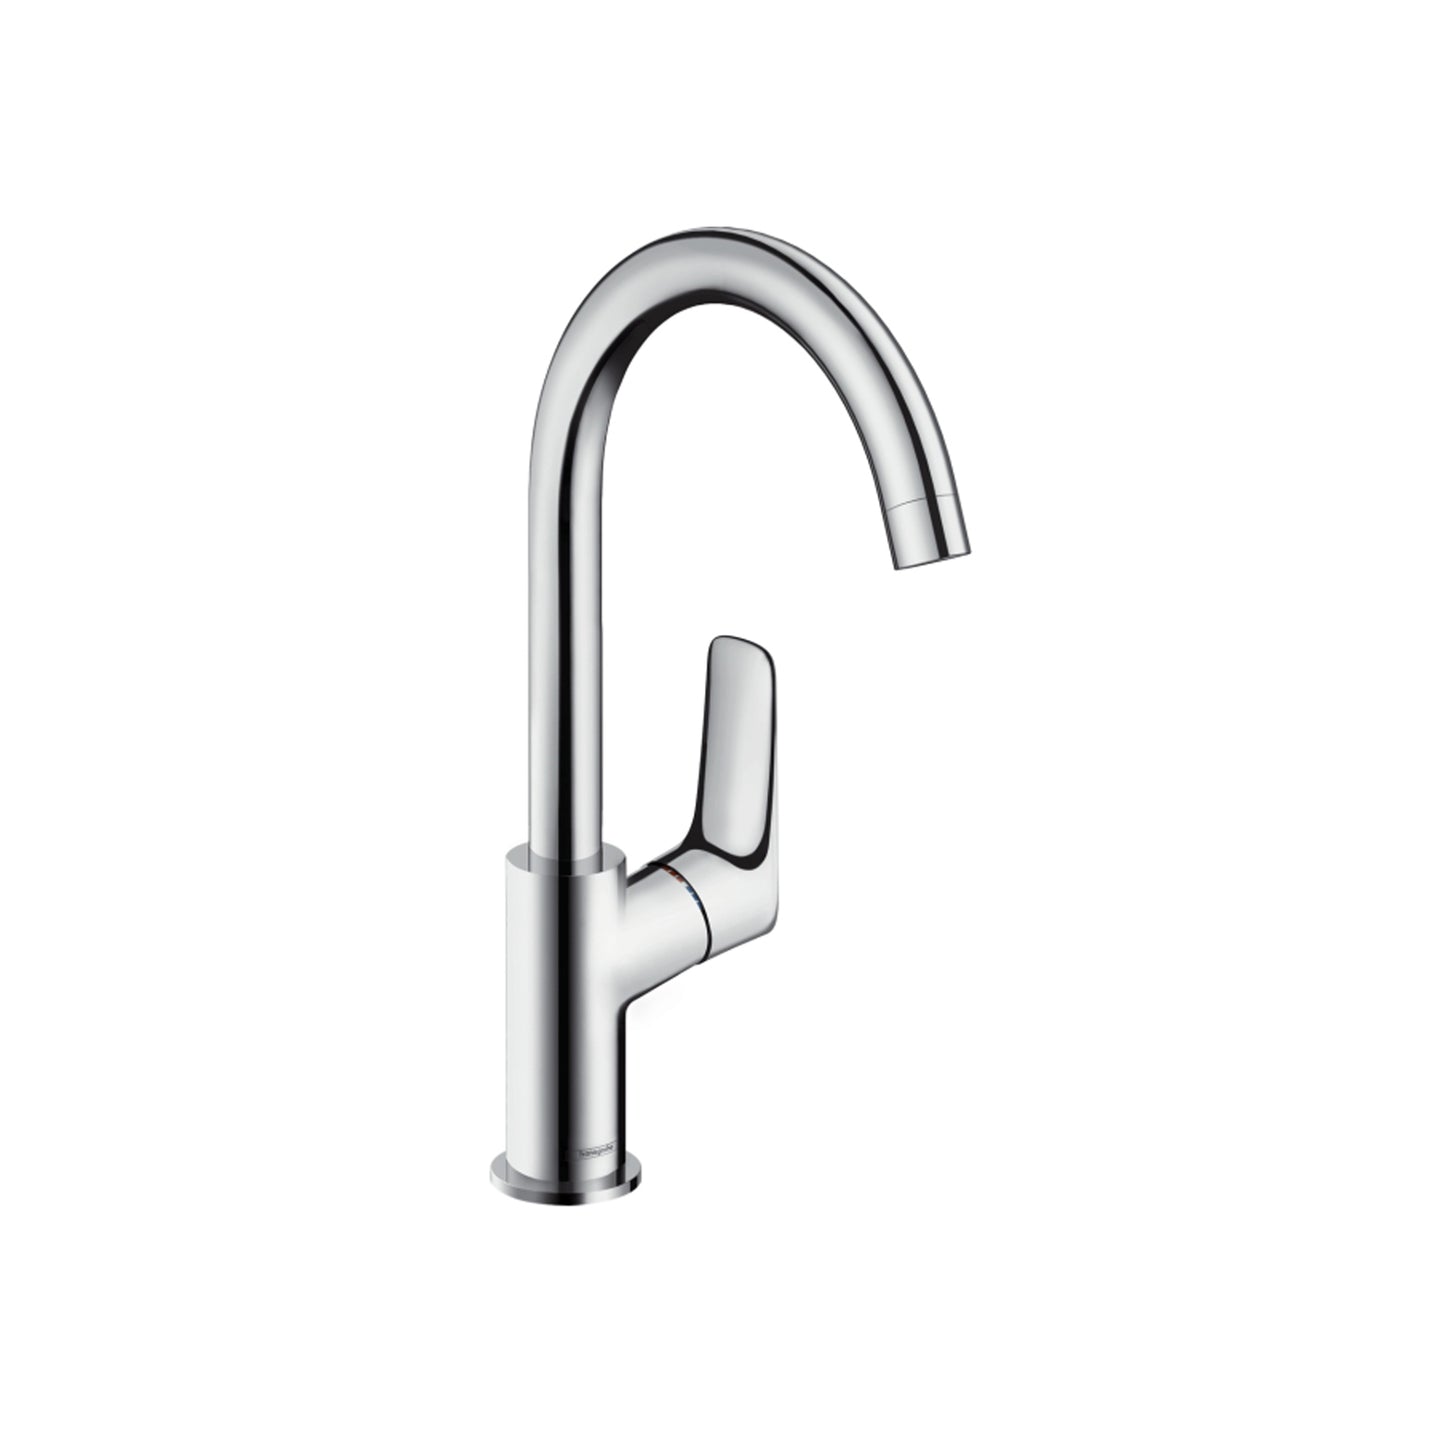 Hansgrohe basin mixer 120 swivel spout with pull rod waste set 71130.000